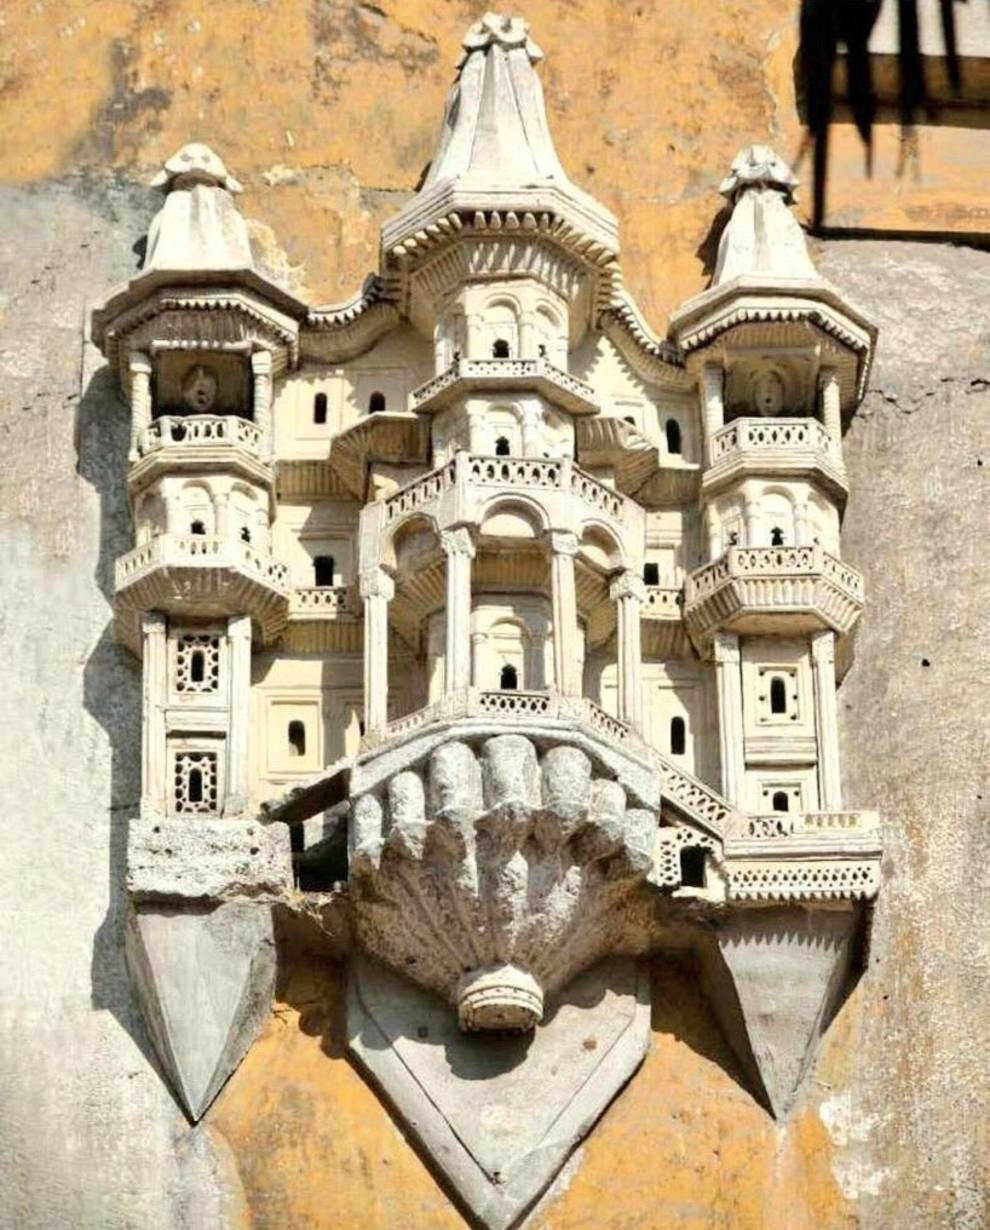 Palaces for sparrows as elements of Ottoman architecture in Turkey